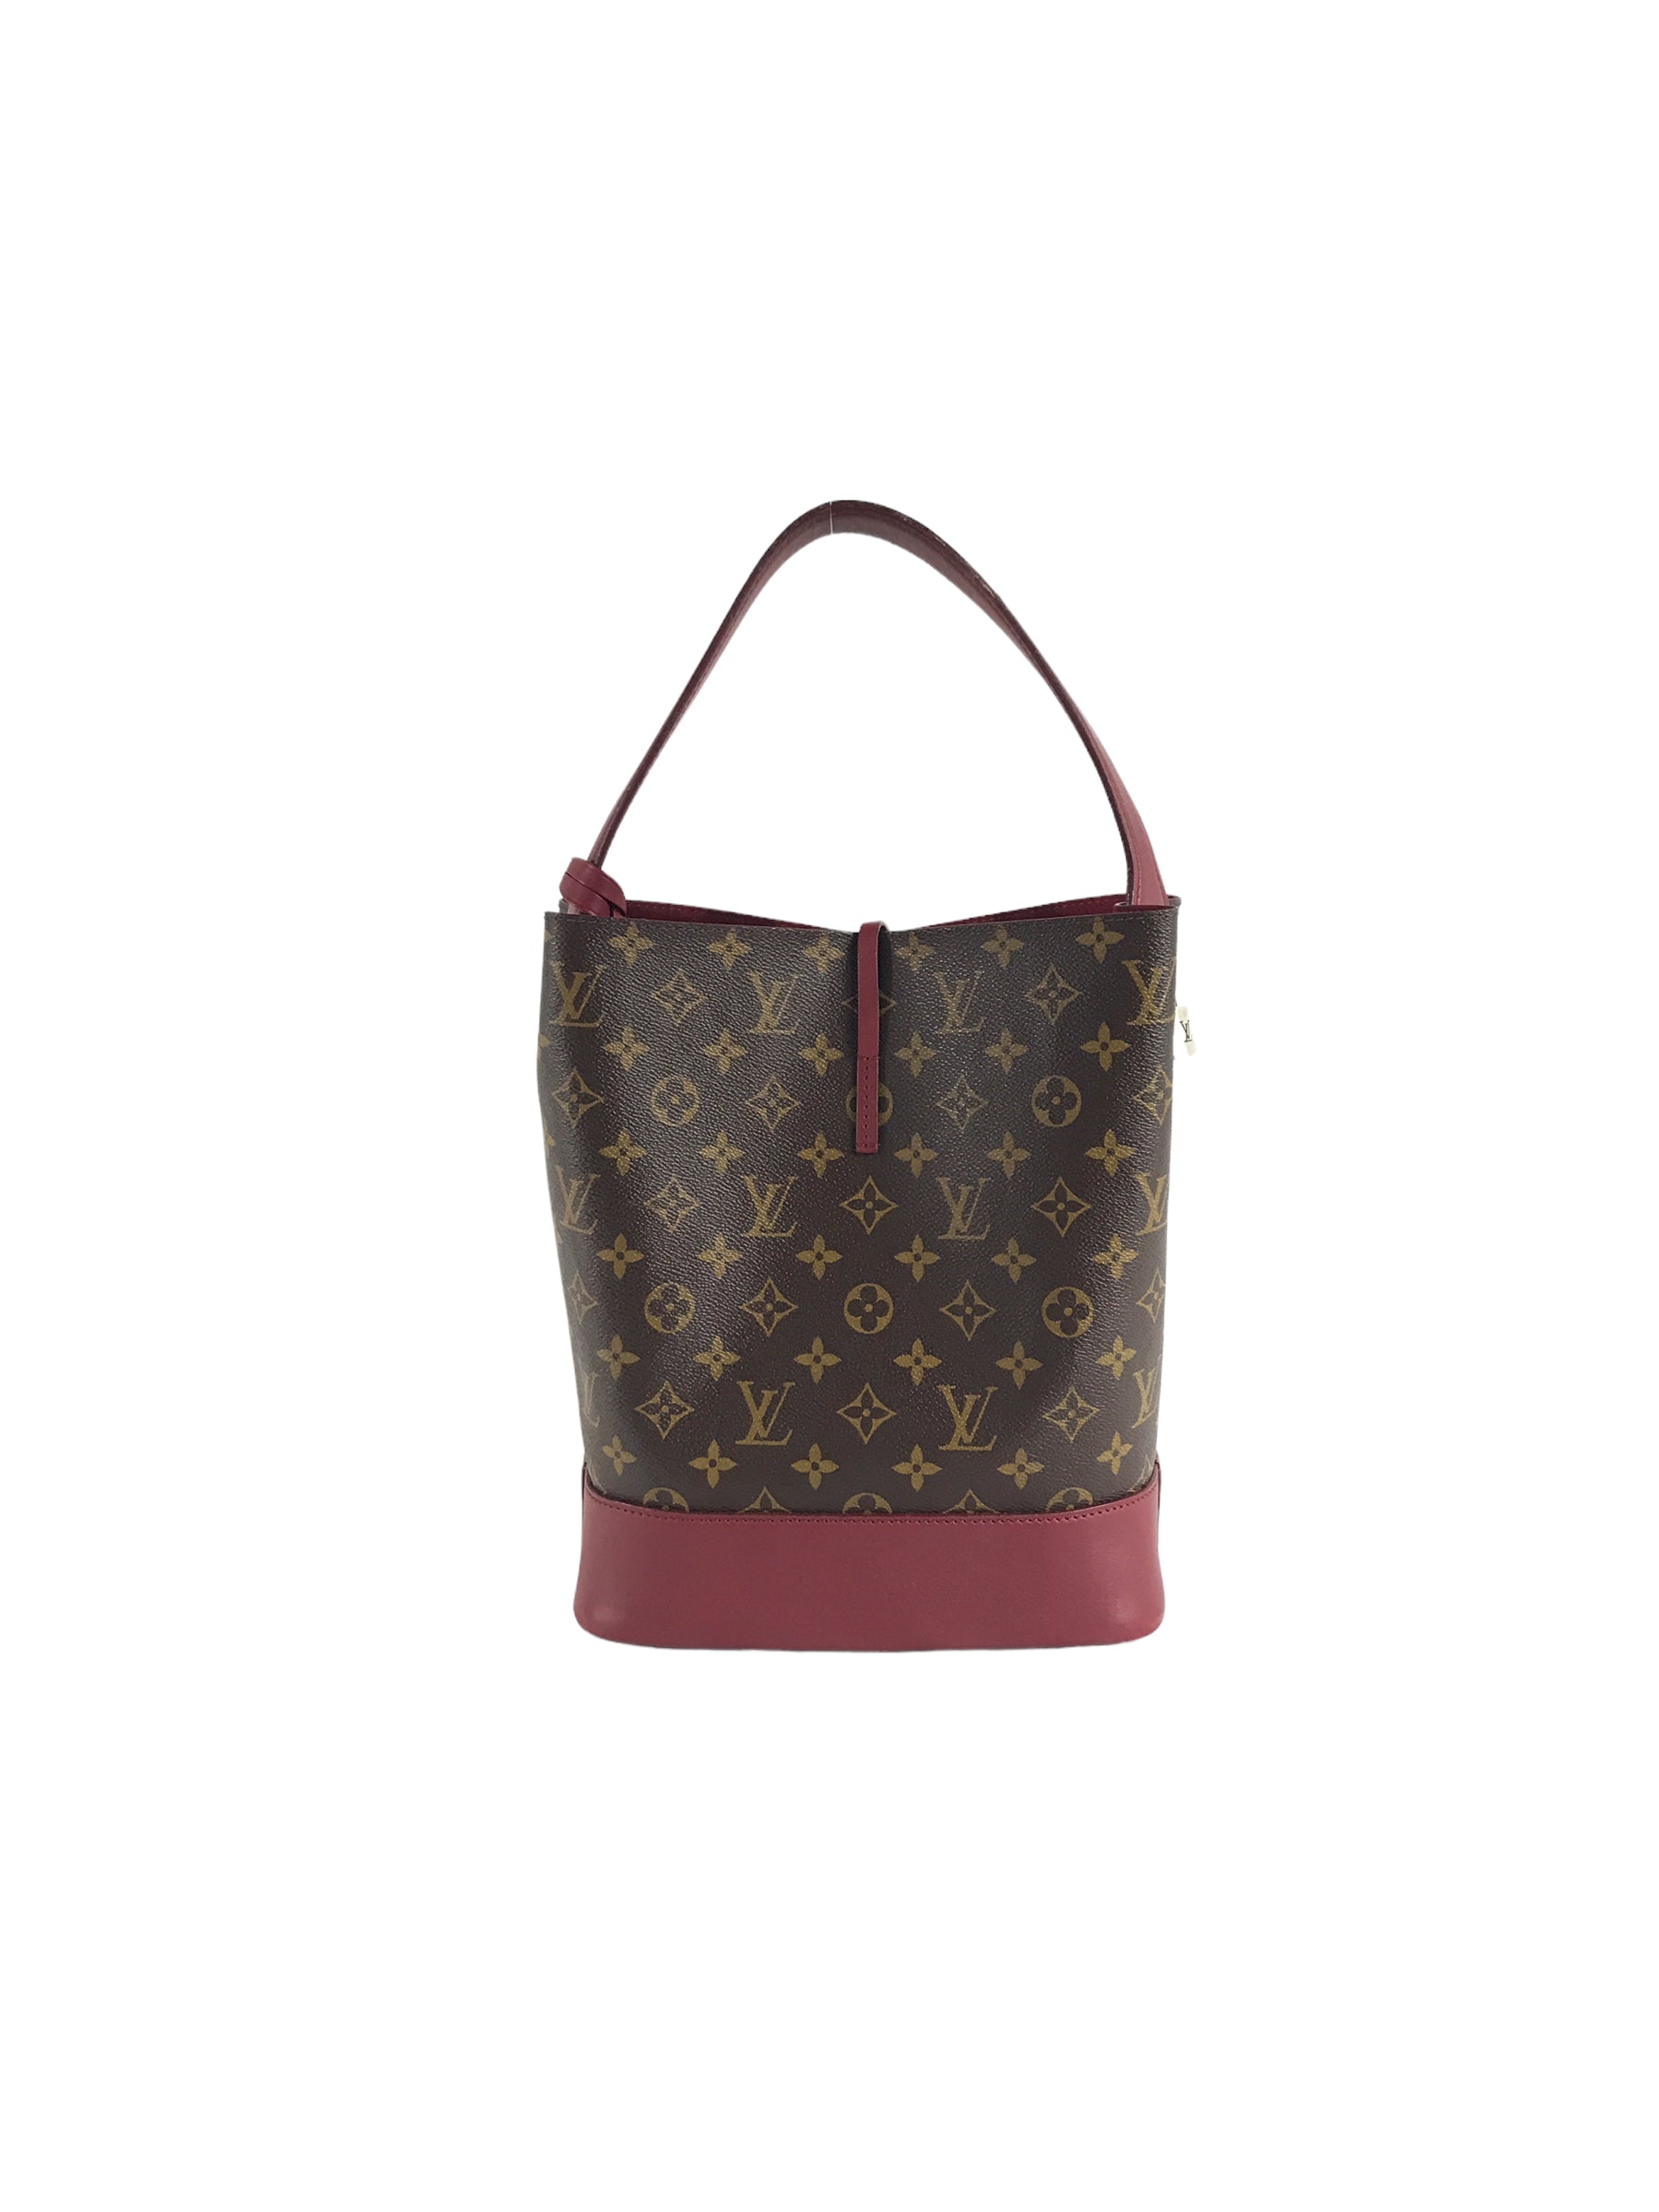 Monogram Coated Canvas/ Burgundy Leather Bucket Shoulder Bag w/ removable pouch w/RHW